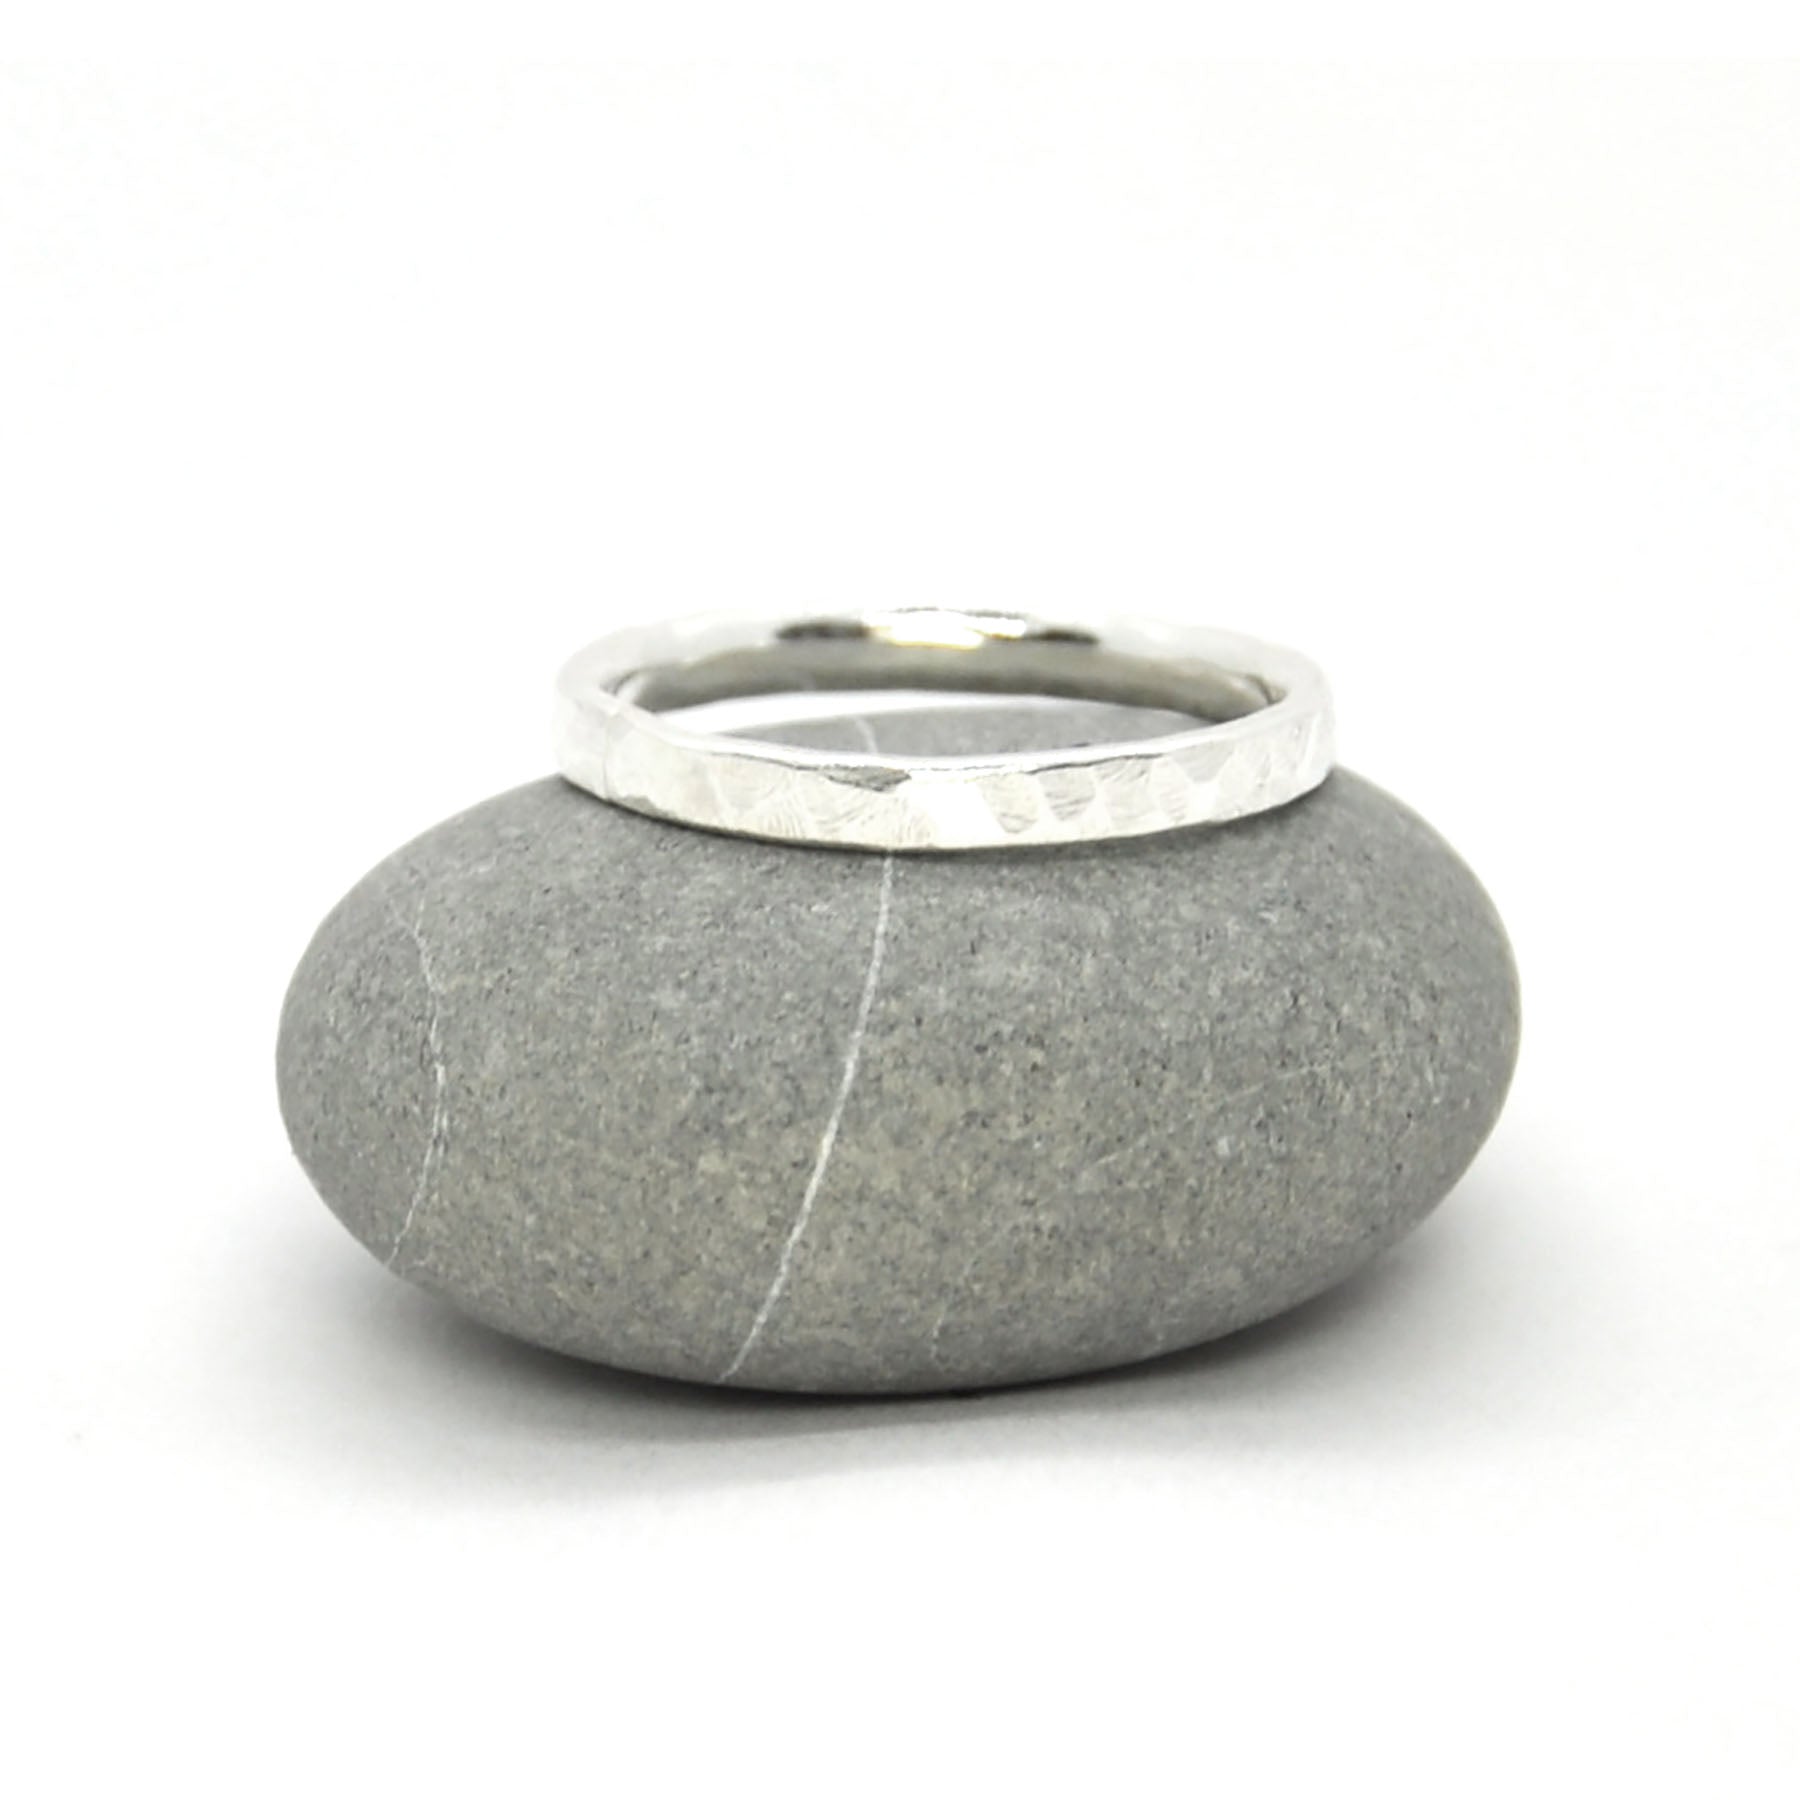 Silver hammered band ring. Pictured on a pebble.